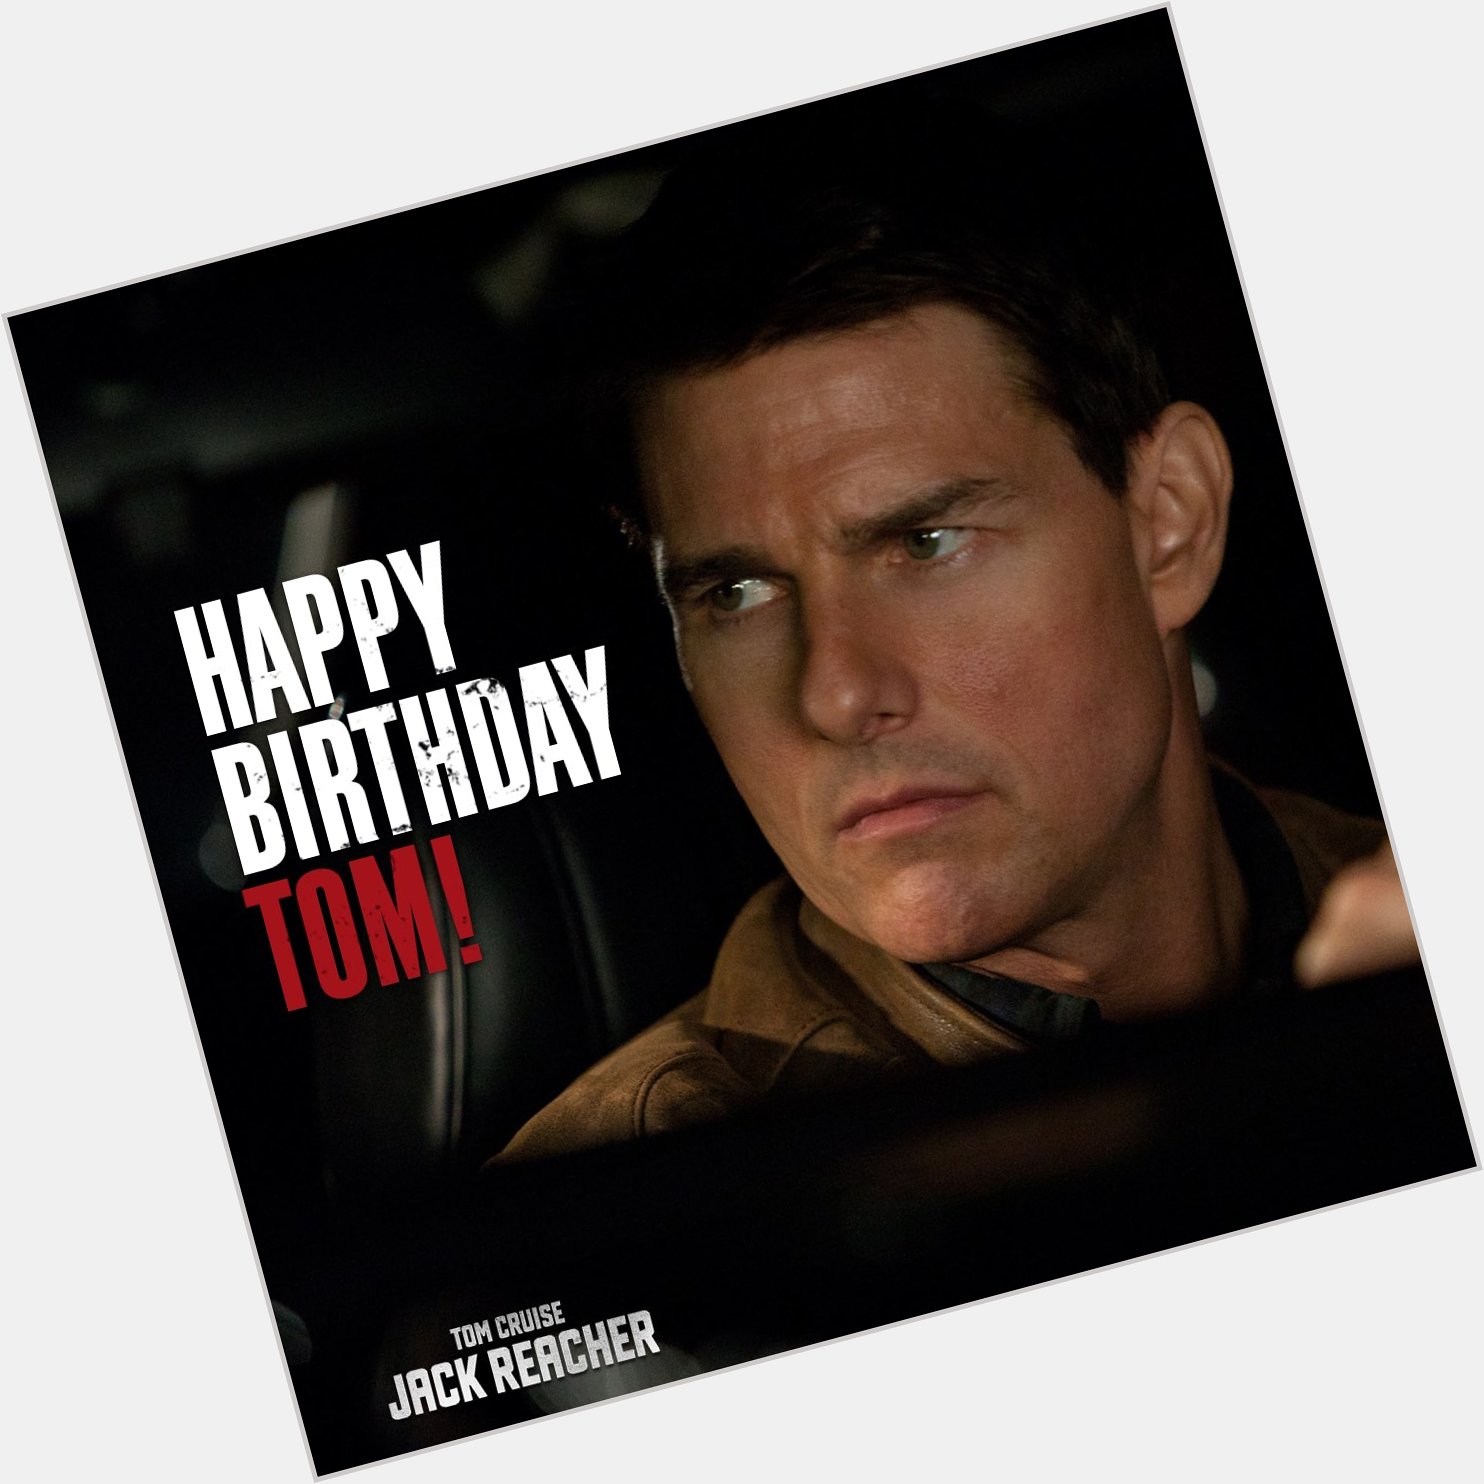 Wishing a happy birthday to the unstoppable Tom Cruise! 